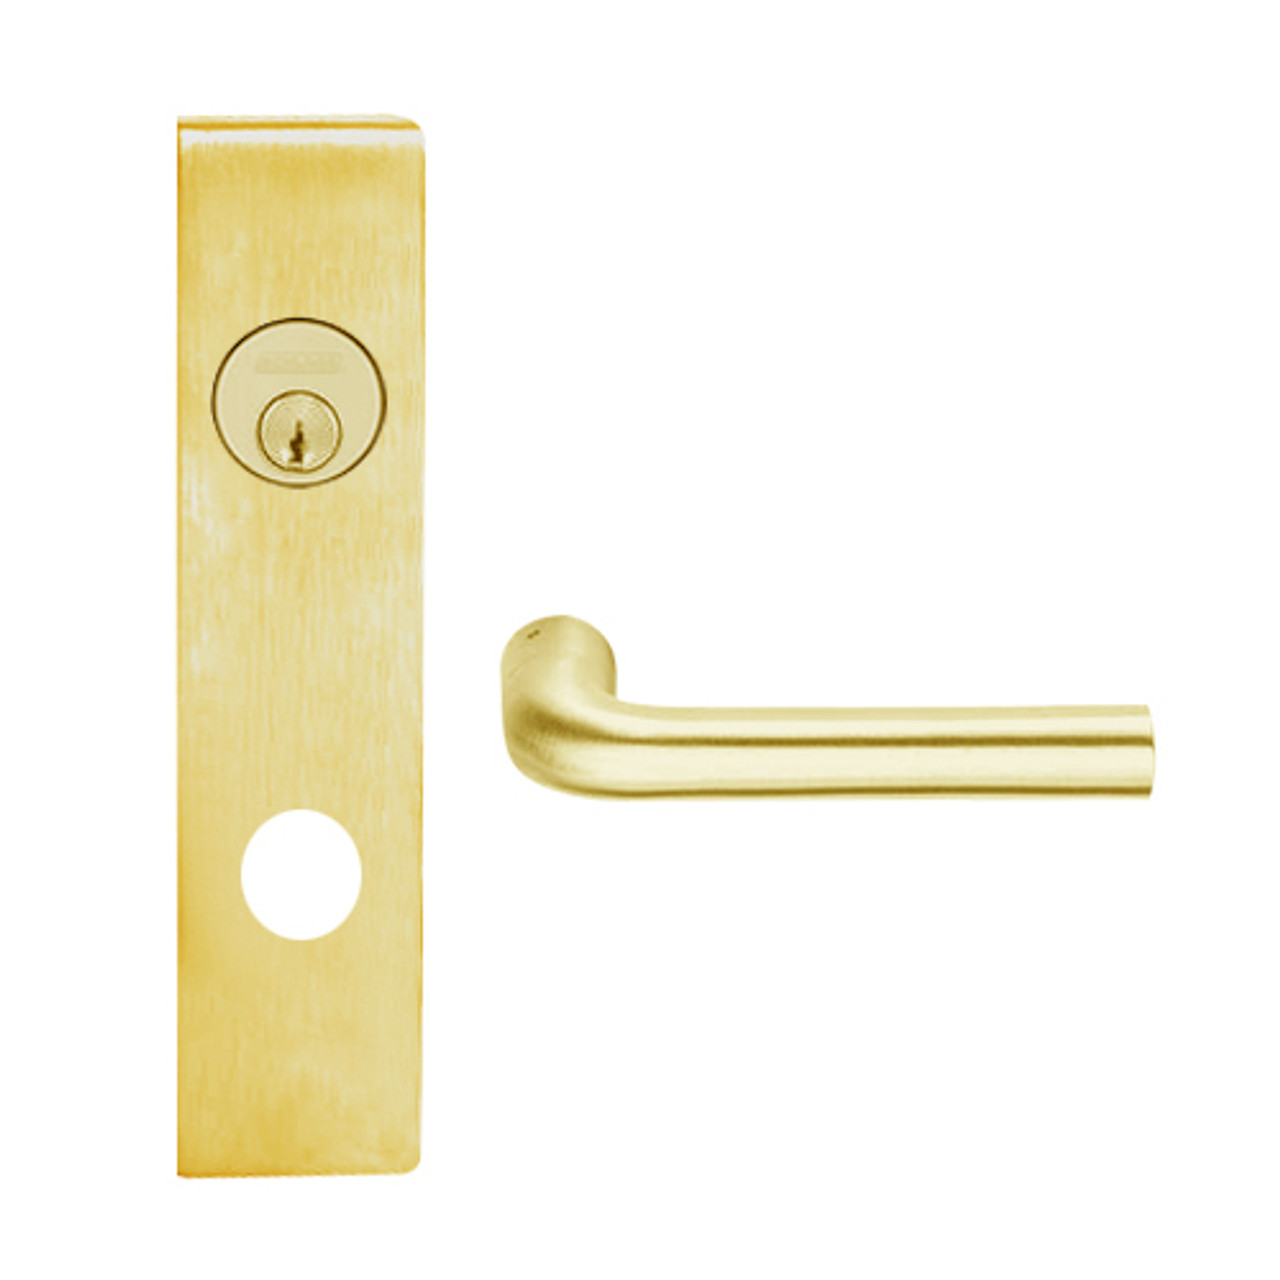 L9026L-02L-605 Schlage L Series Less Cylinder Exit Lock with Cylinder Commercial Mortise Lock with 02 Cast Lever Design in Bright Brass